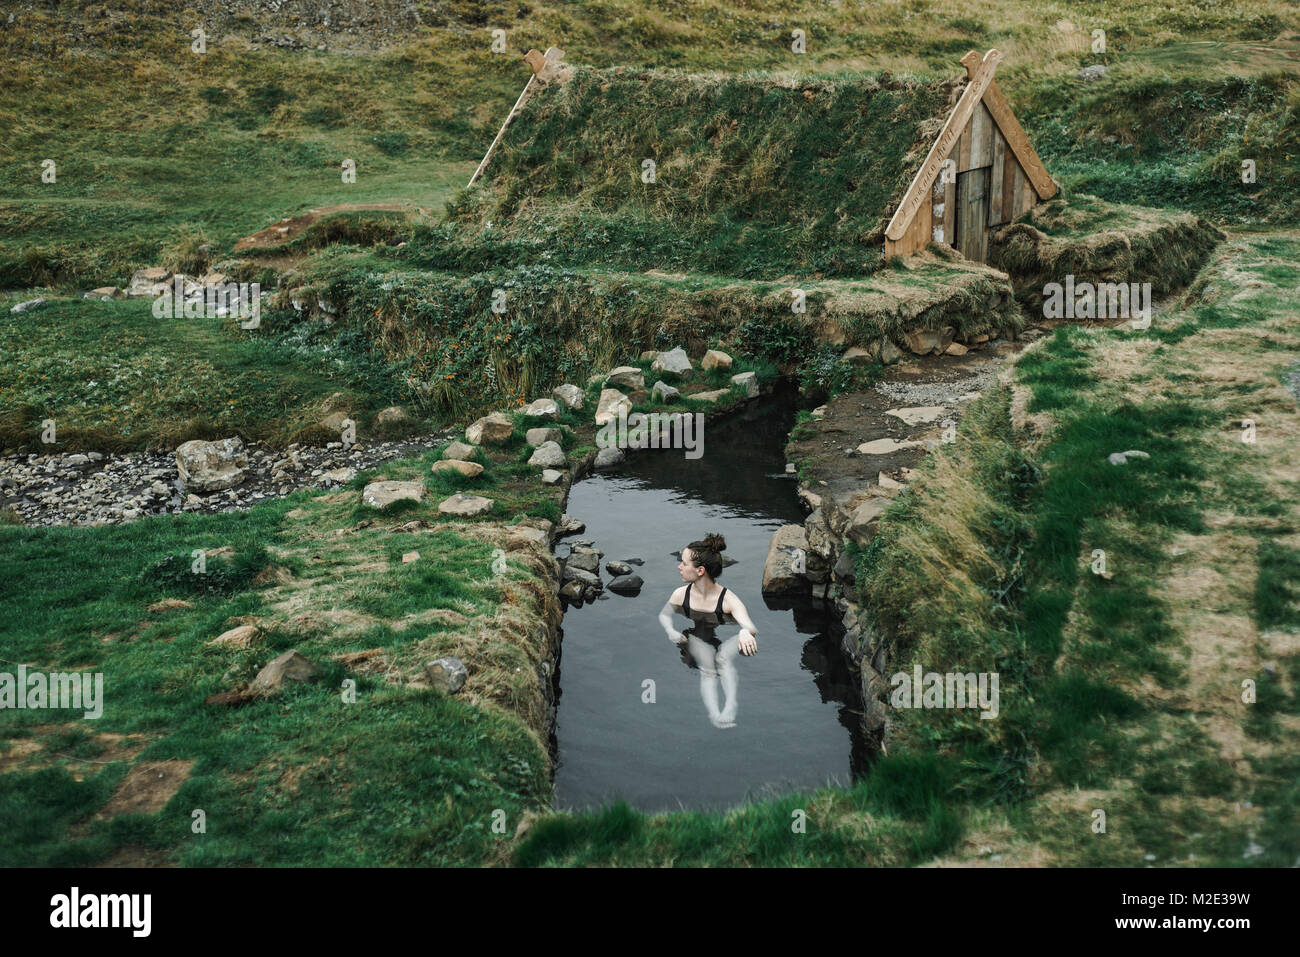 Caucasian woman swimming in pond near rural house Stock Photo